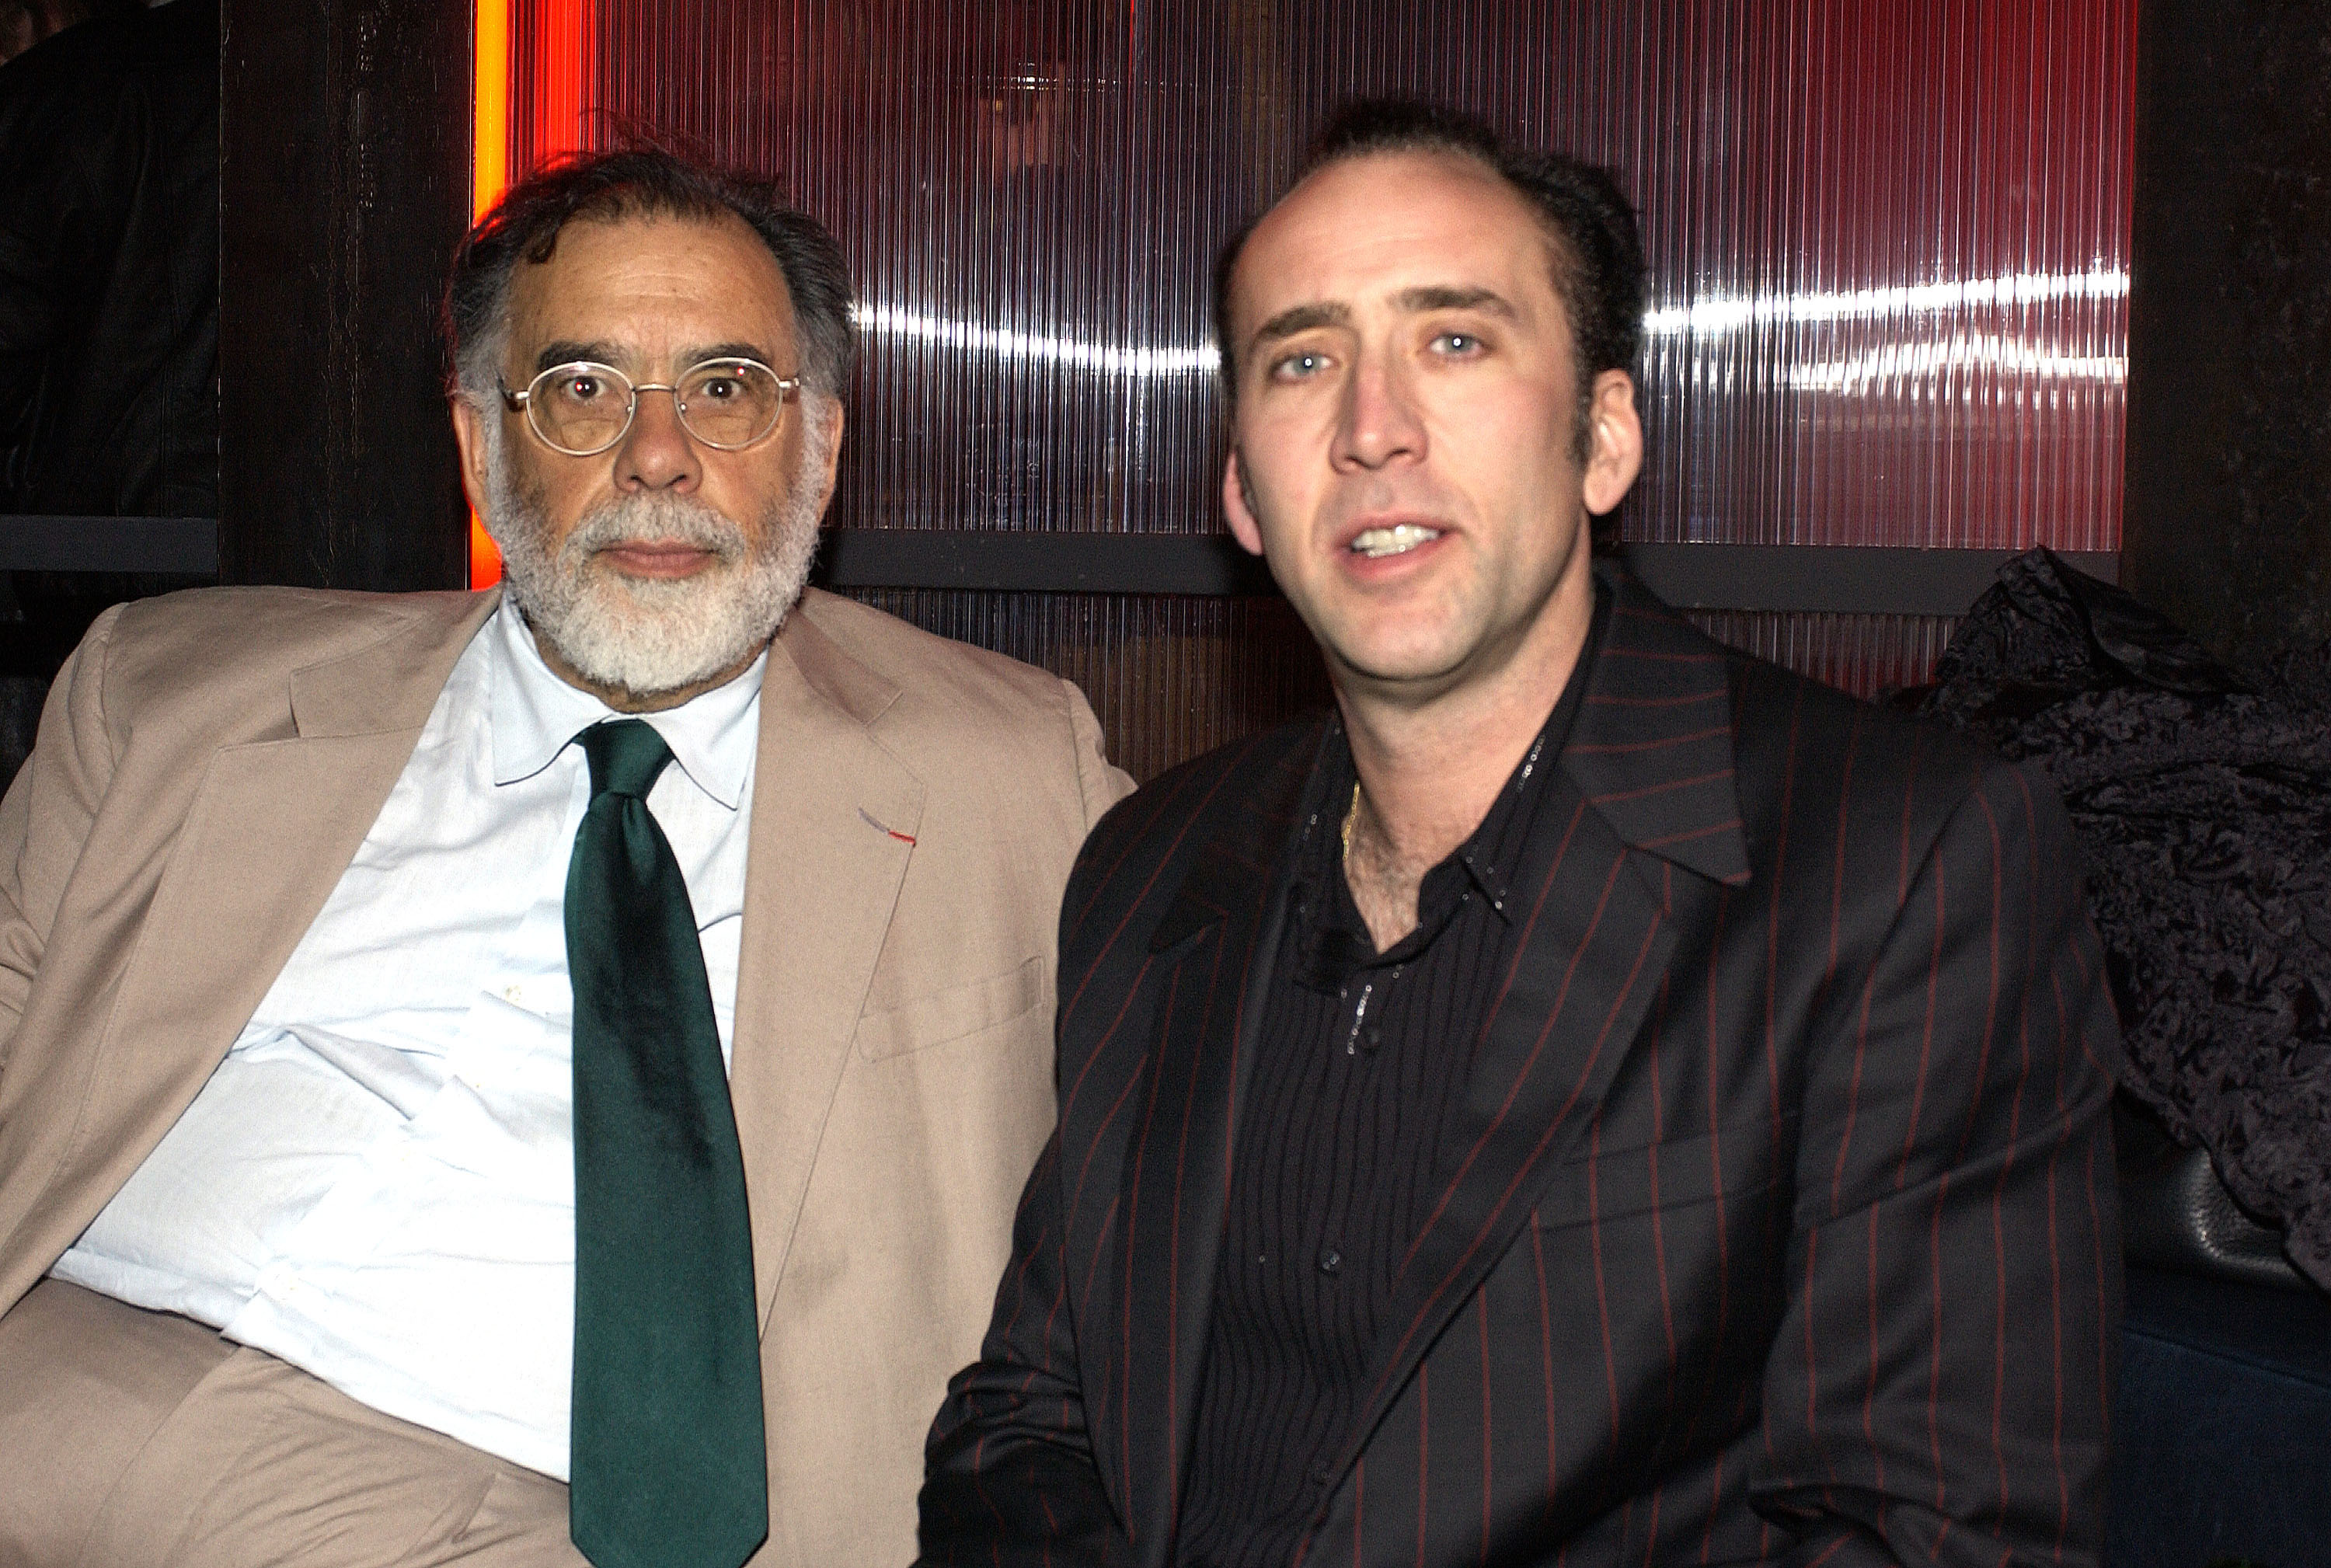 Francis Ford Coppola and Nicolas Cage at an after-party on March 17, 2003, in Hollywood, California. | Source: Getty Images